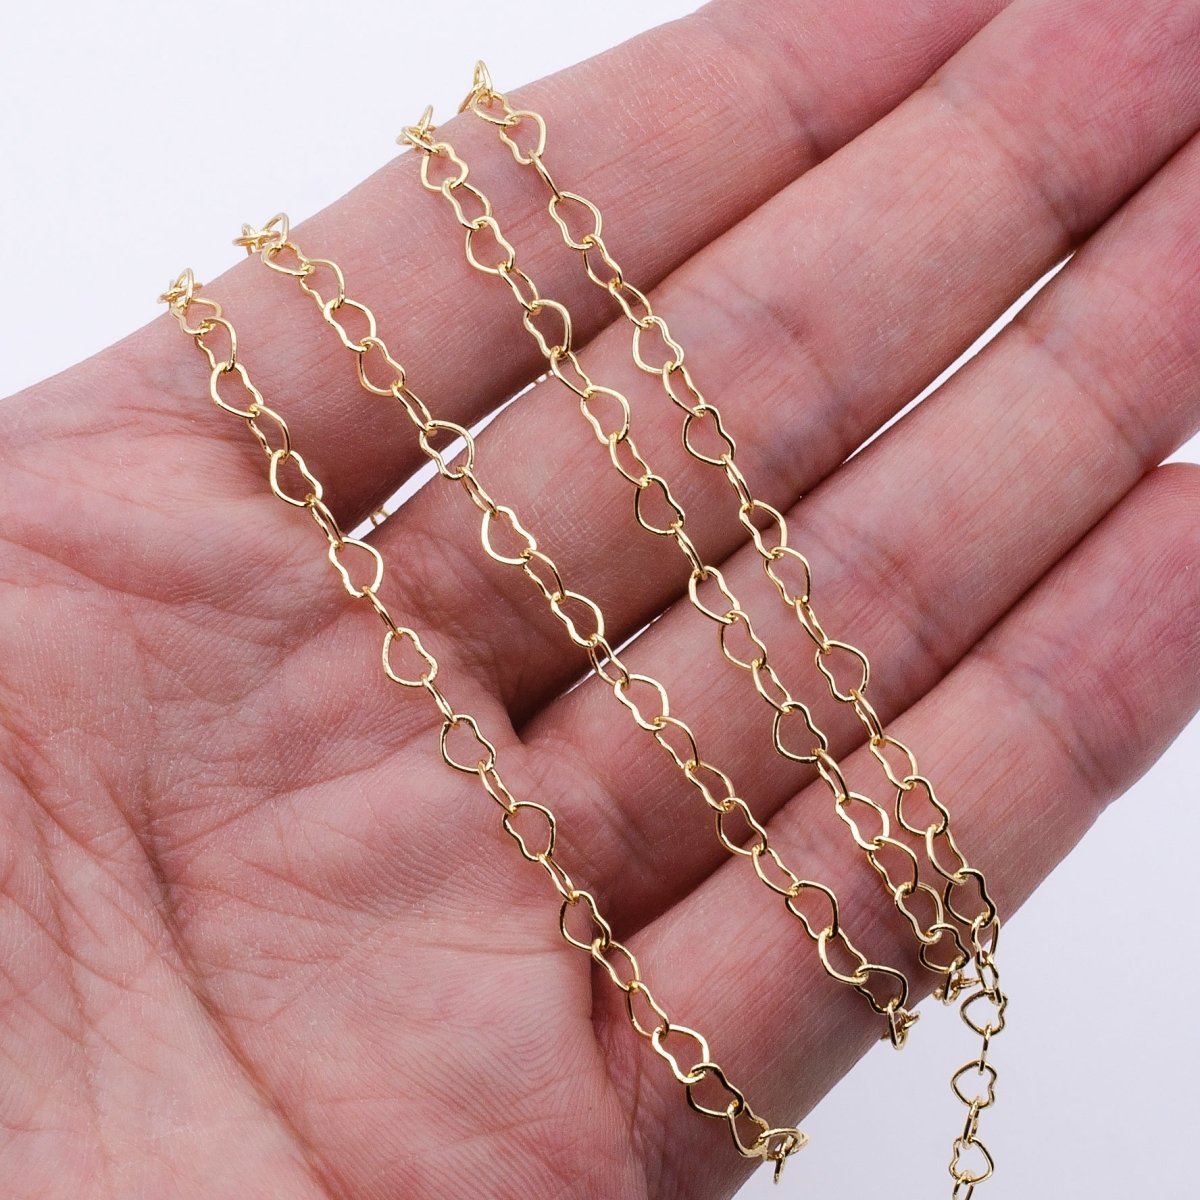 14k Gold Filled Heart Link Gold Chain by Yard, Lovely Heart Charm Chain, Wholesale bulk Roll Chain for Jewelry Making Width 3.4mm | ROLL-1076 - DLUXCA